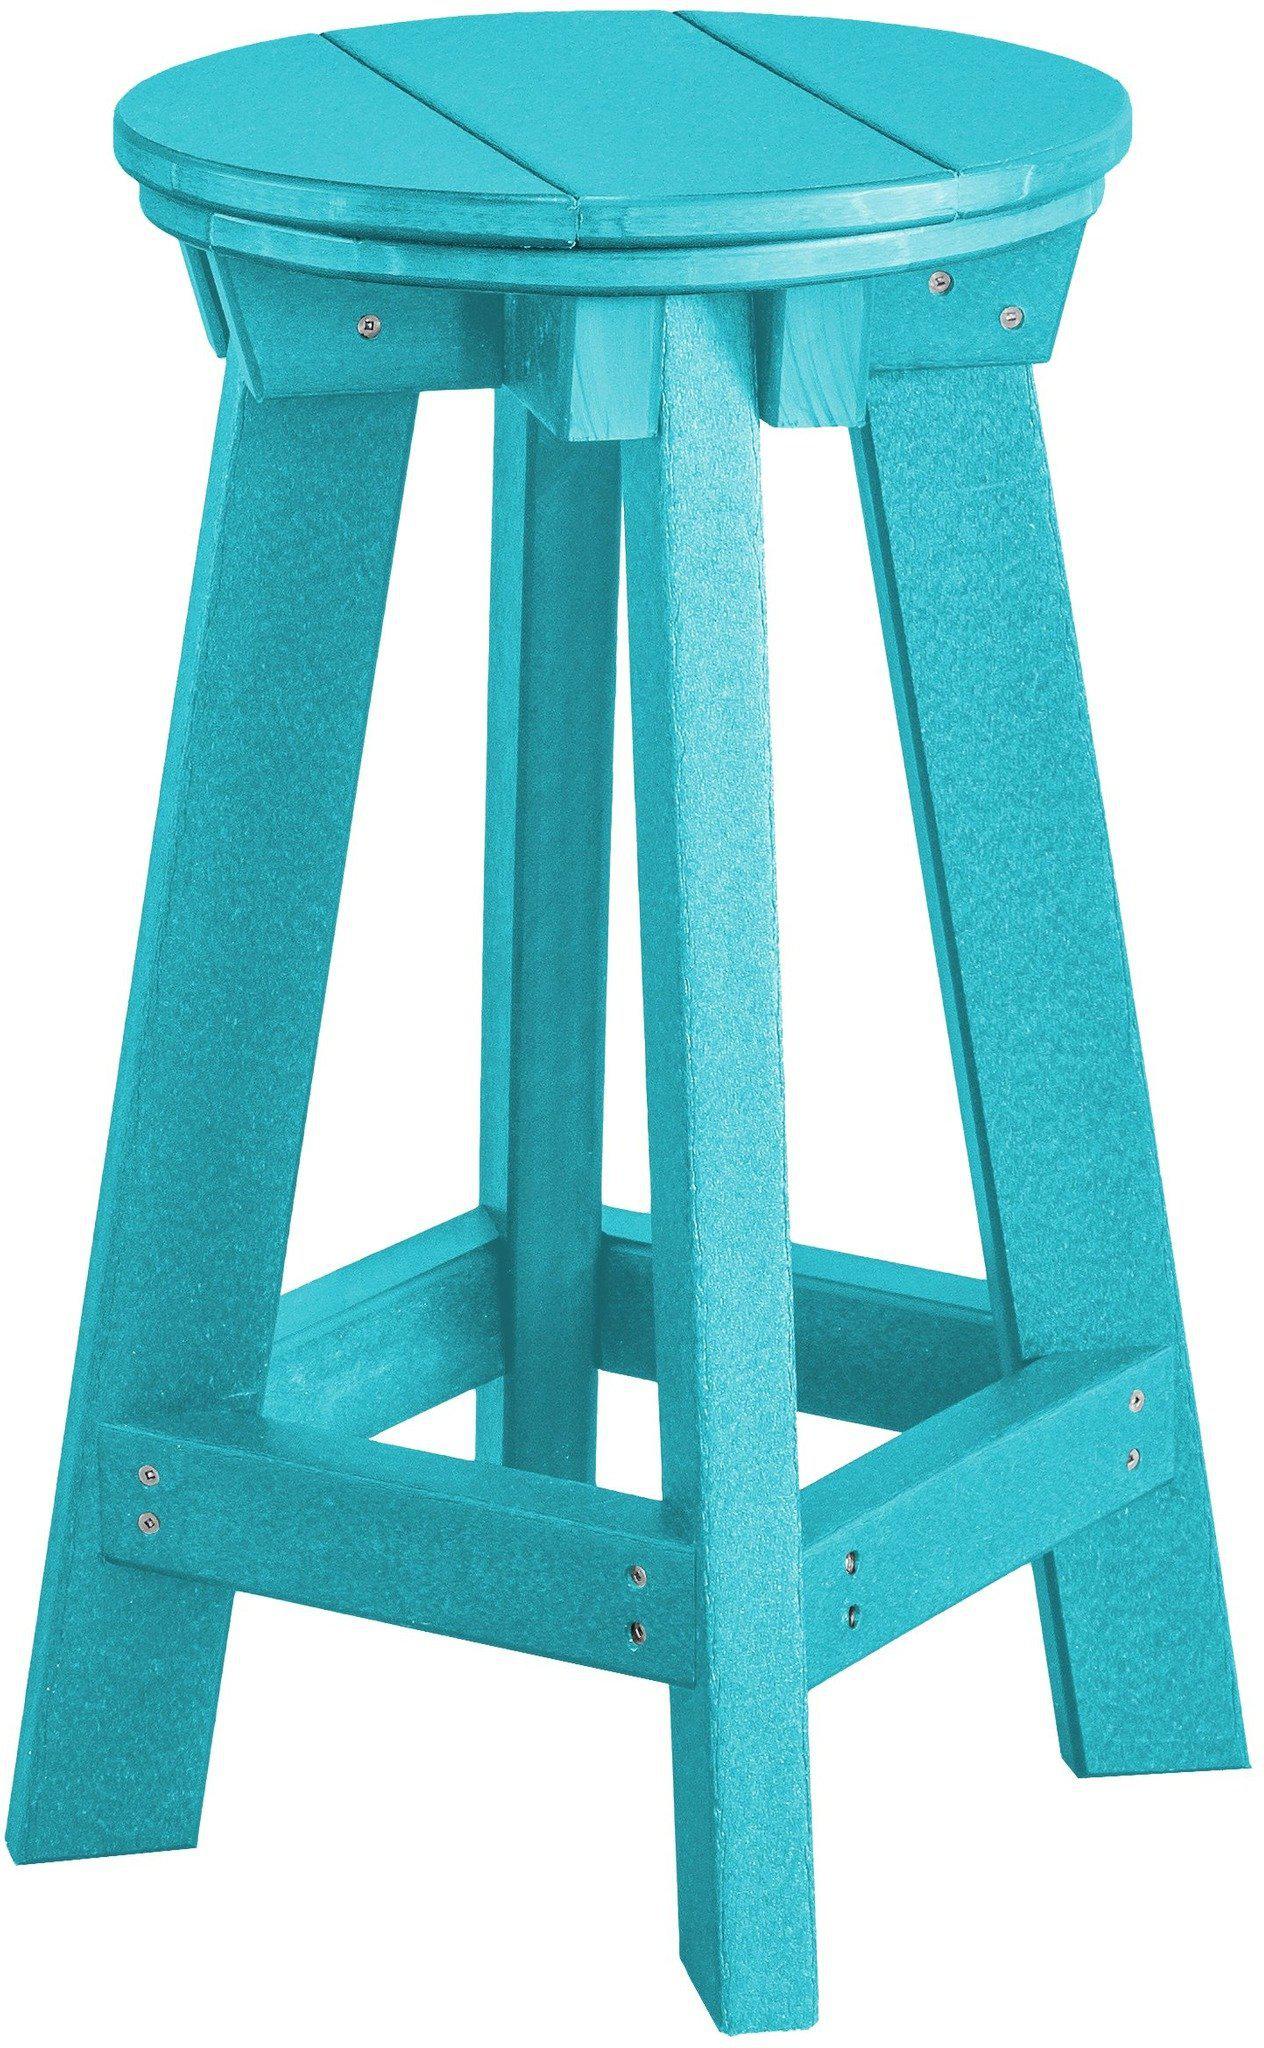 Wildridge Heritage Recycled Plastic Outdoor Bar Stool - LEAD TIME TO SHIP 3 WEEKS